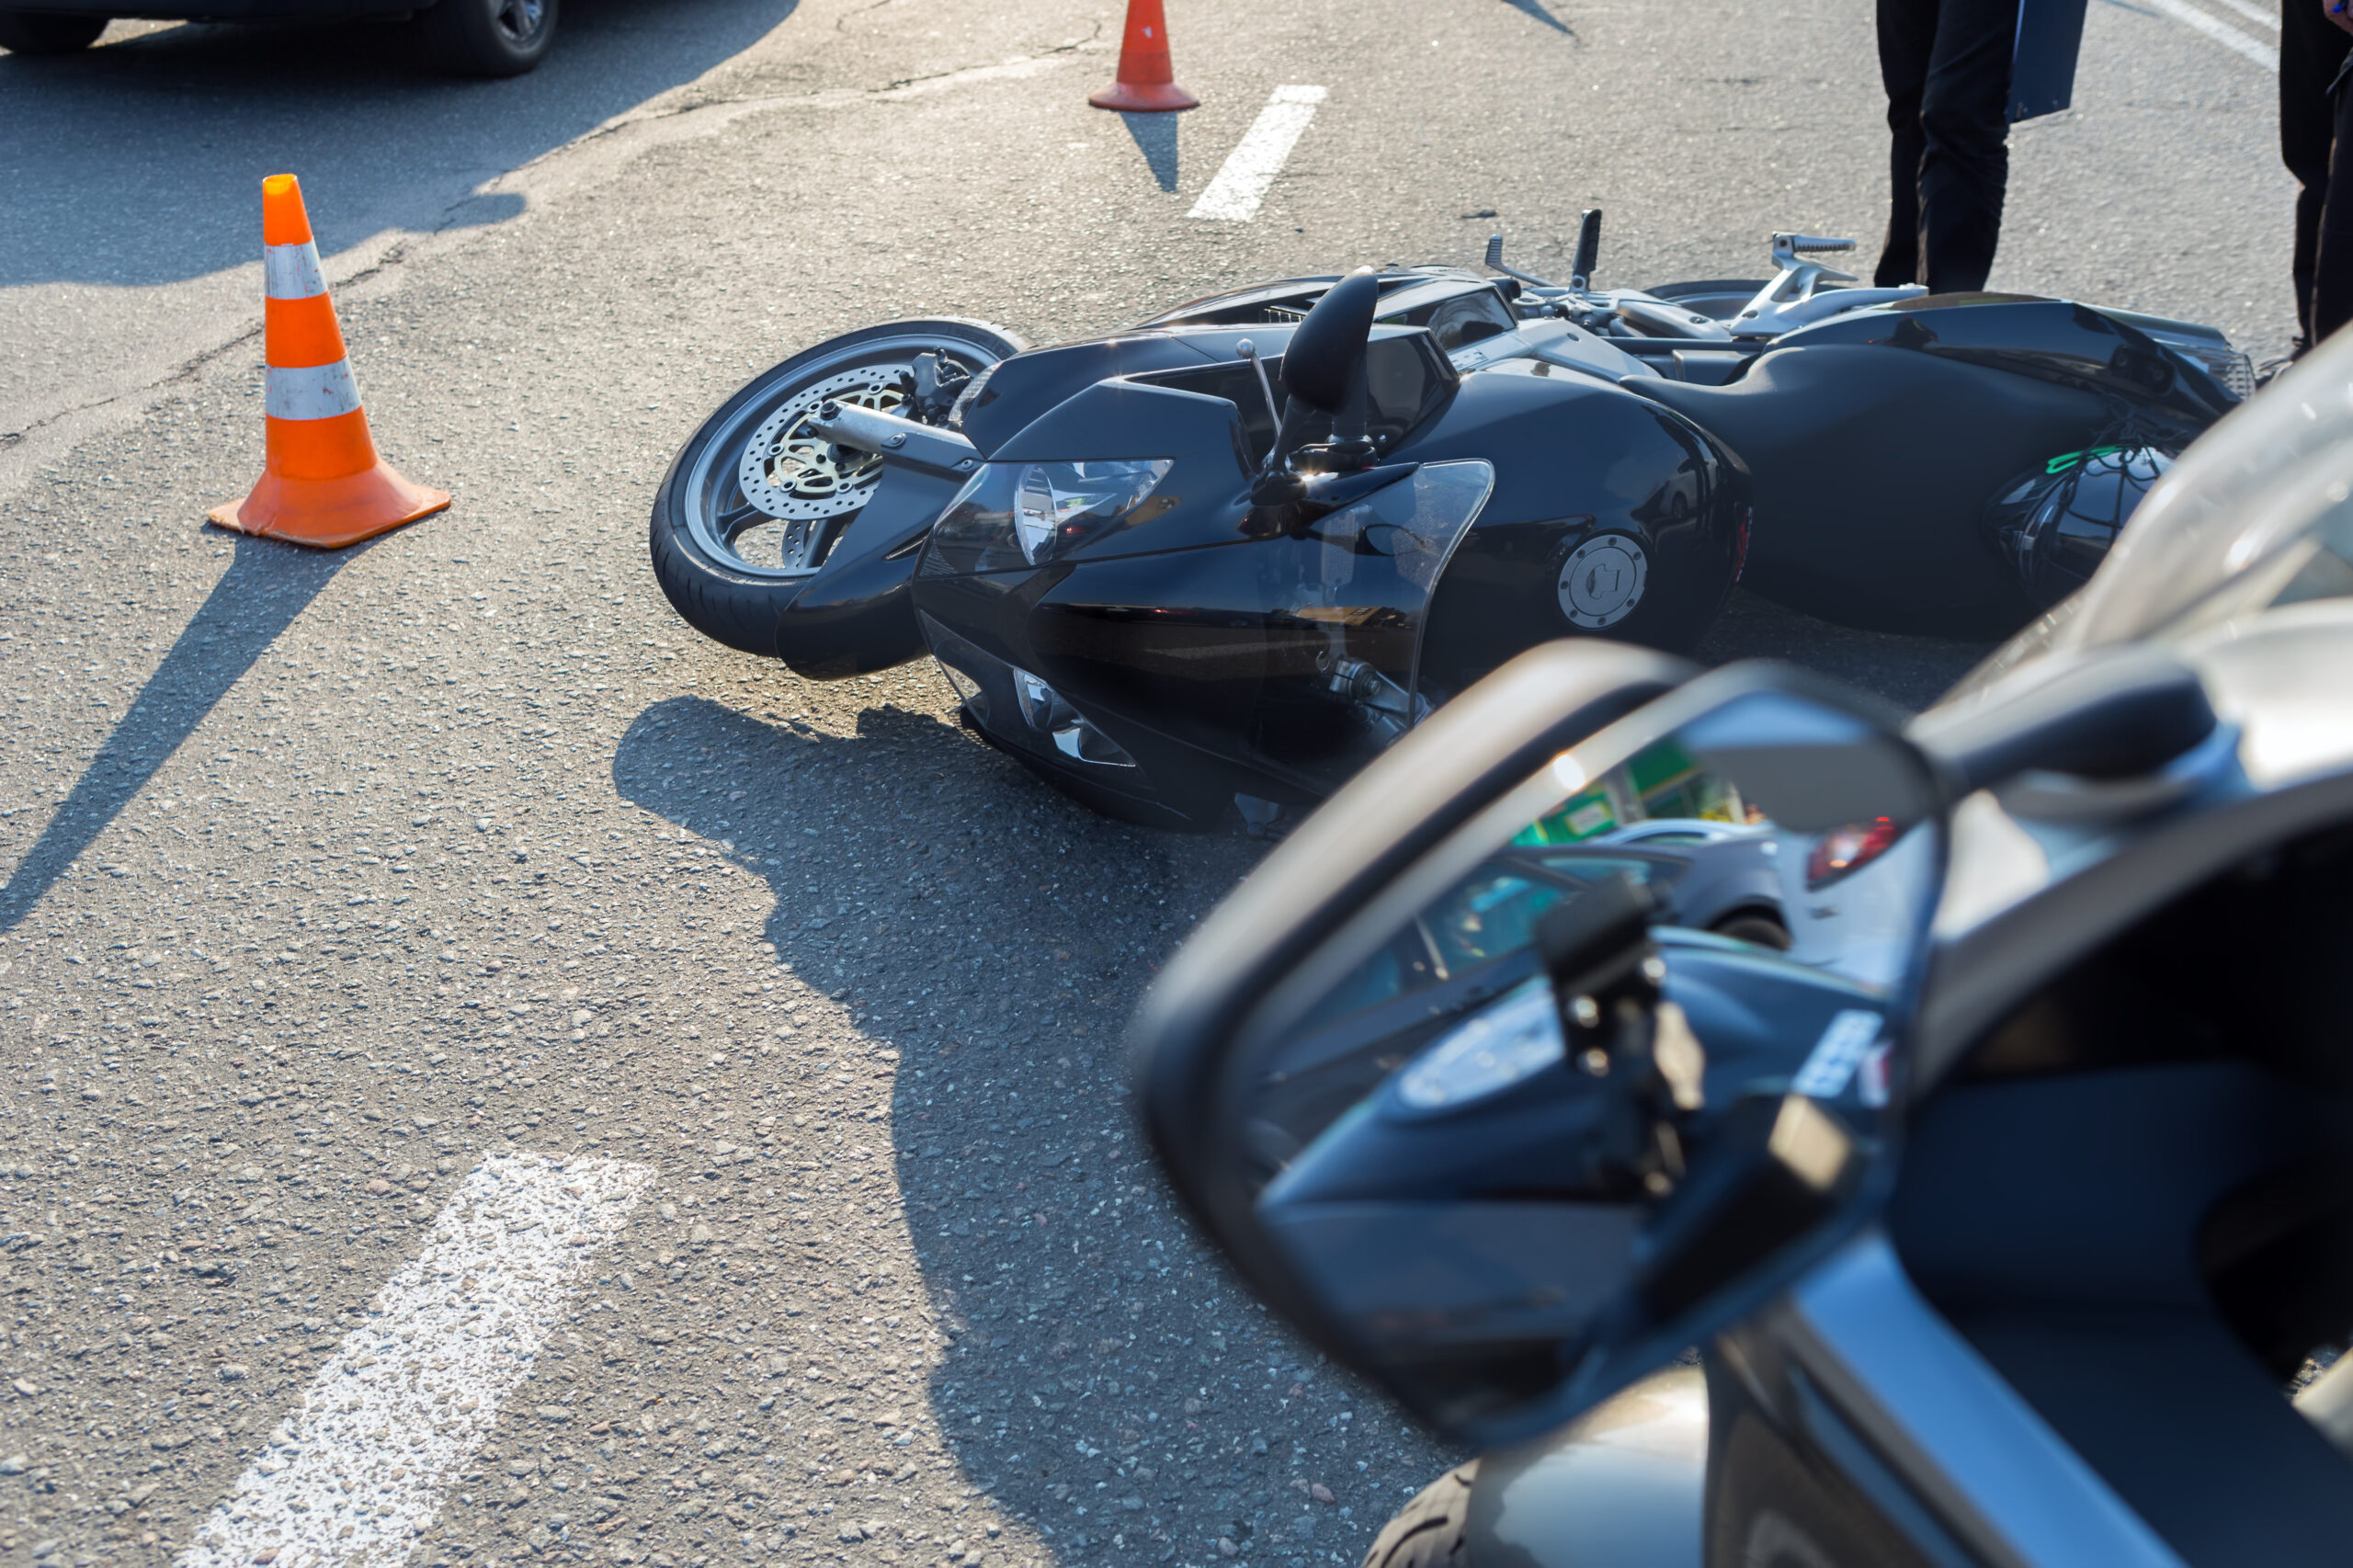 Lewisville Motorcycle Accident Lawyer